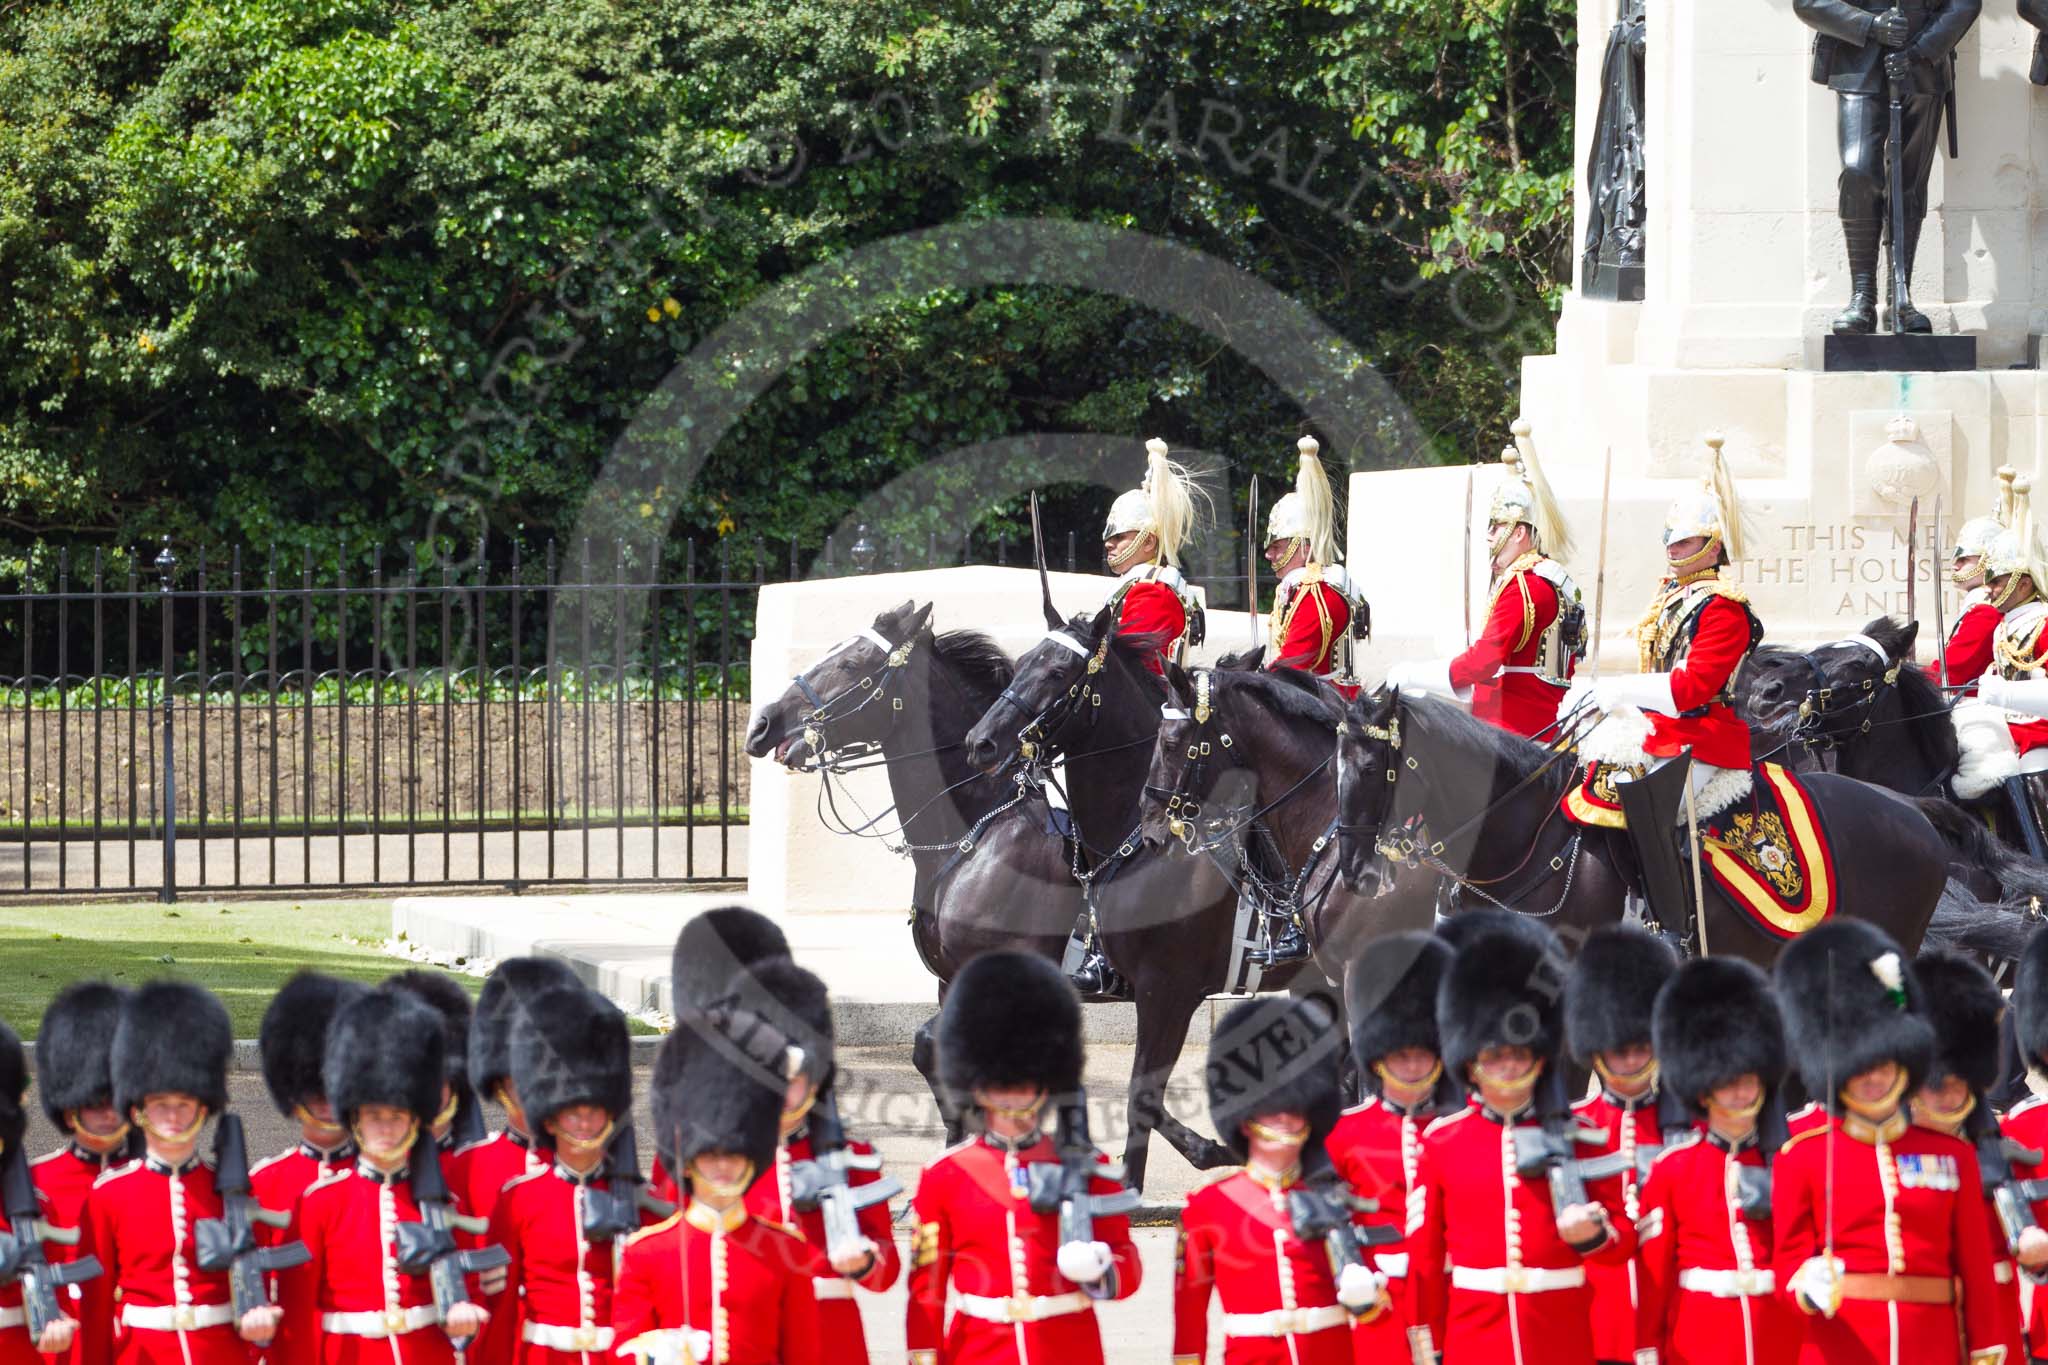 The Colonel's Review 2015.
Horse Guards Parade, Westminster,
London,

United Kingdom,
on 06 June 2015 at 11:59, image #552